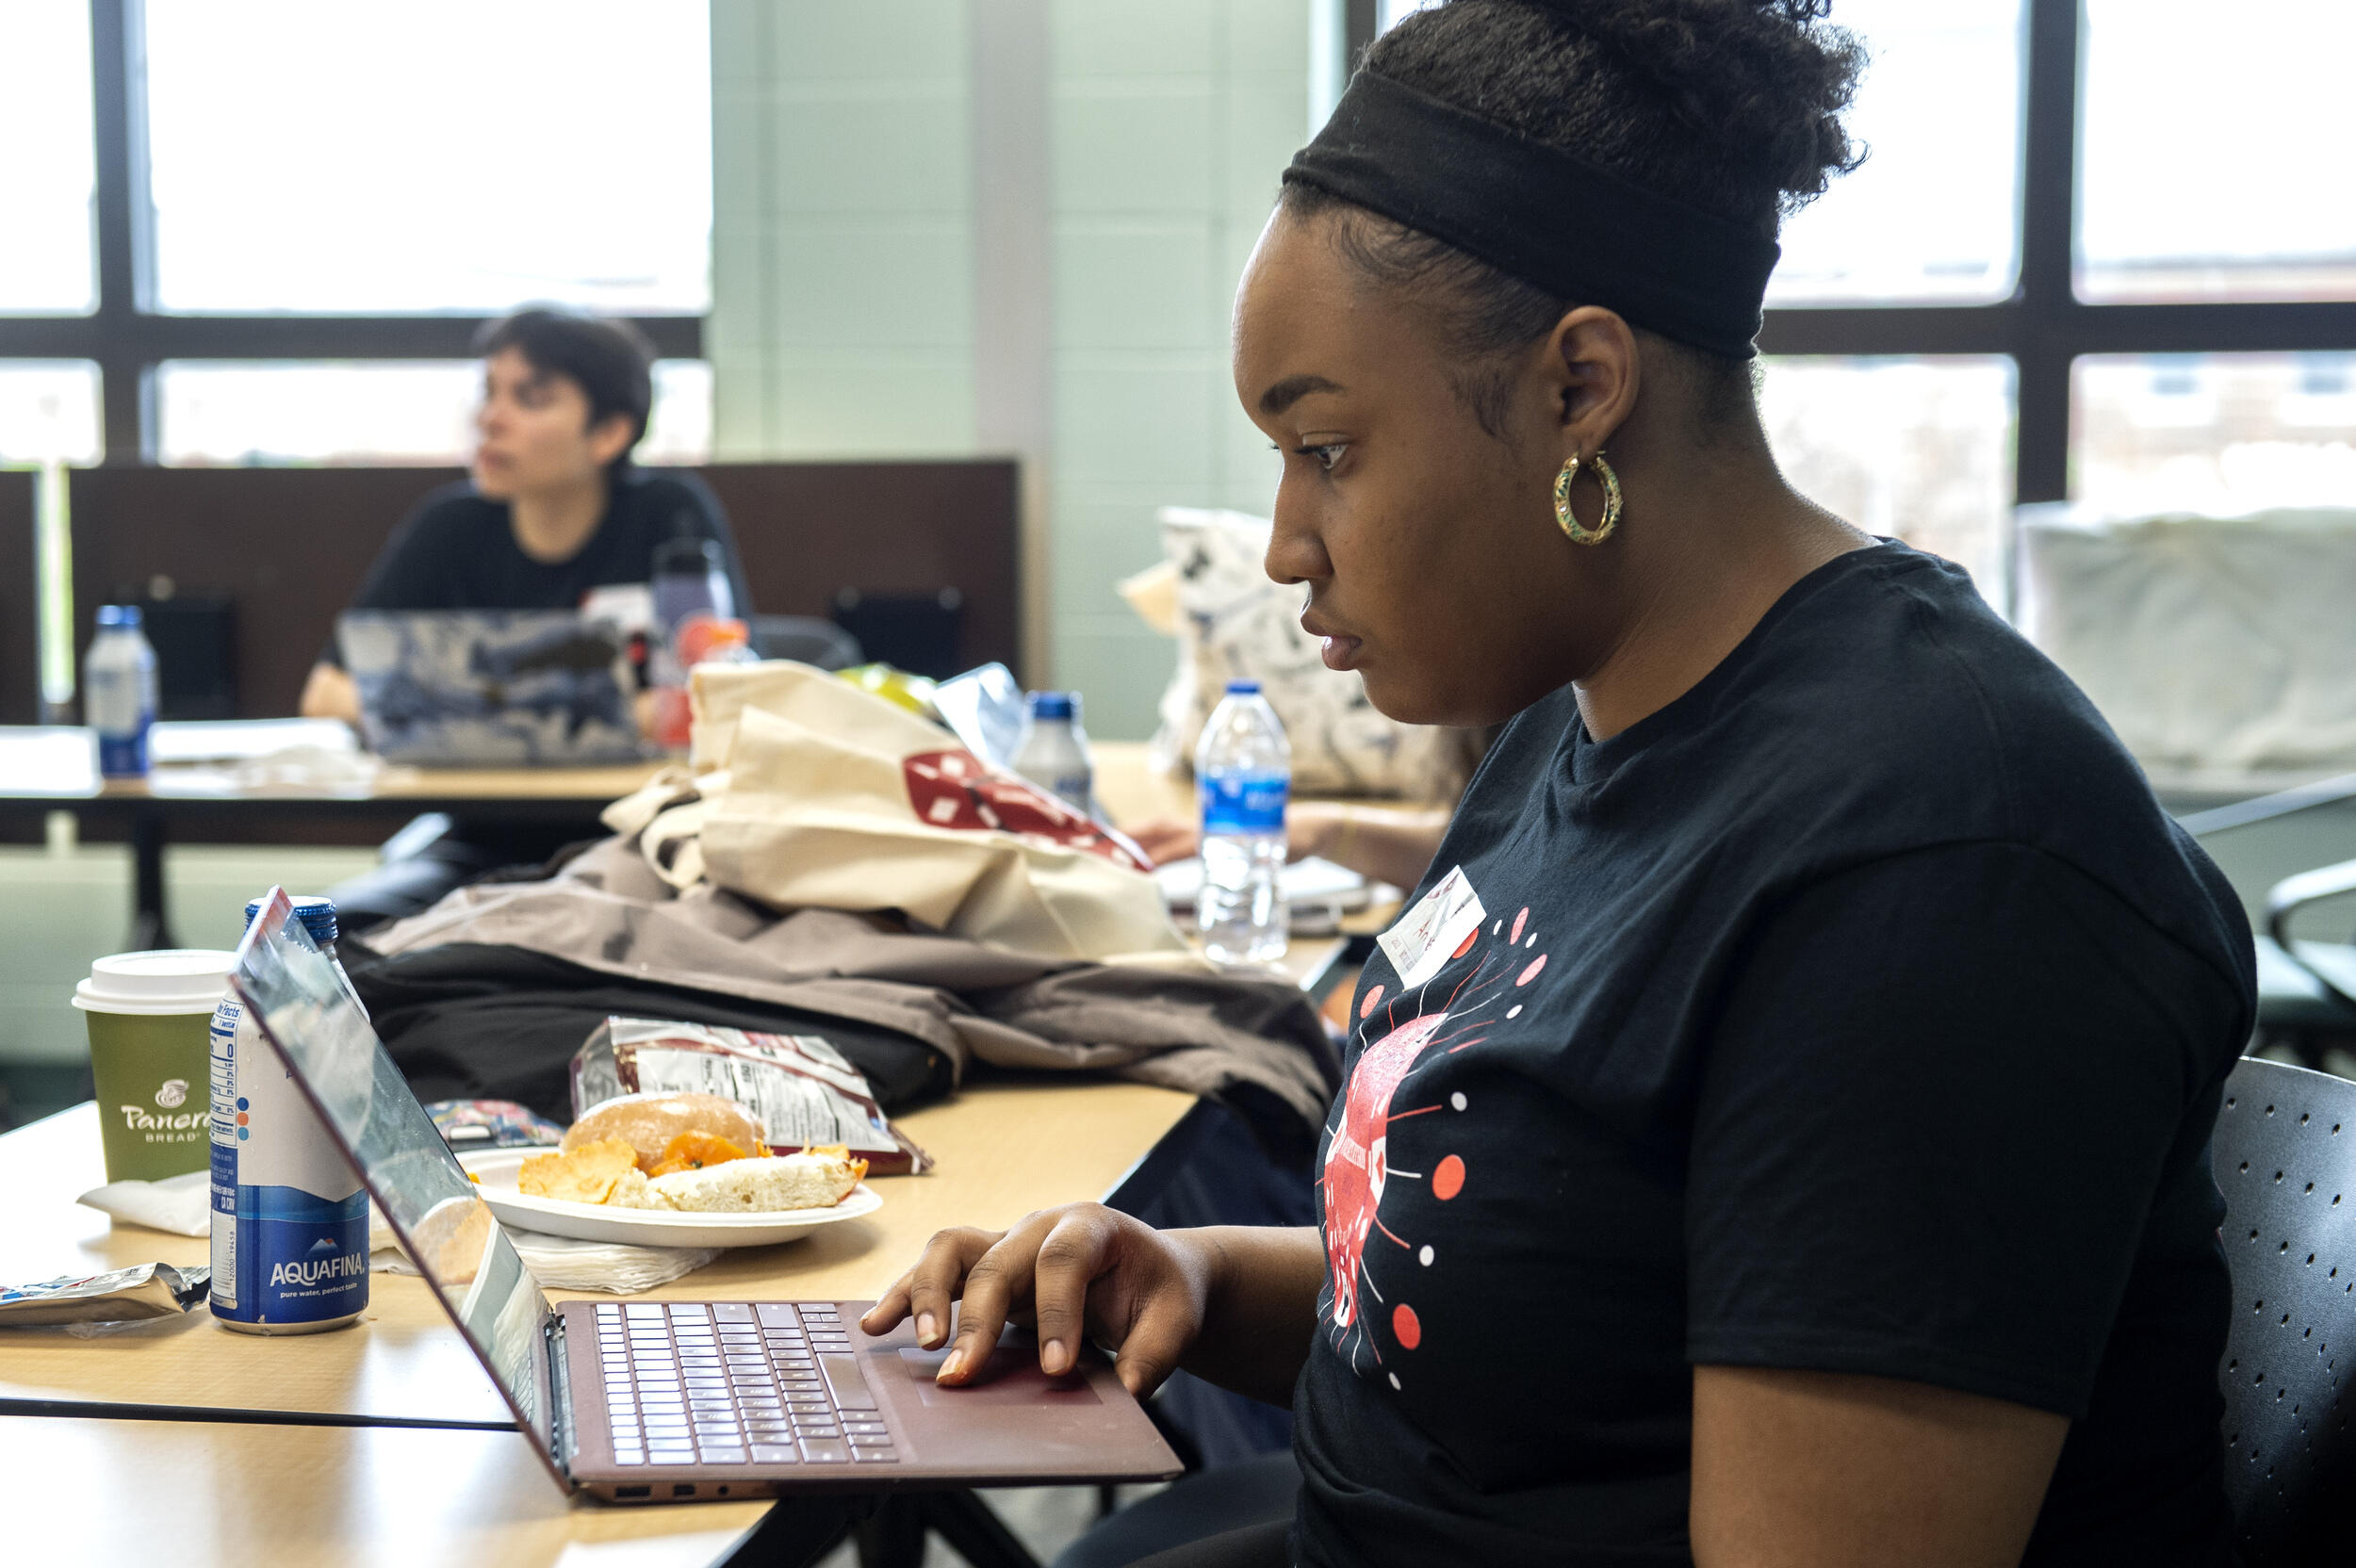 A student looking at a laptop with food next to her